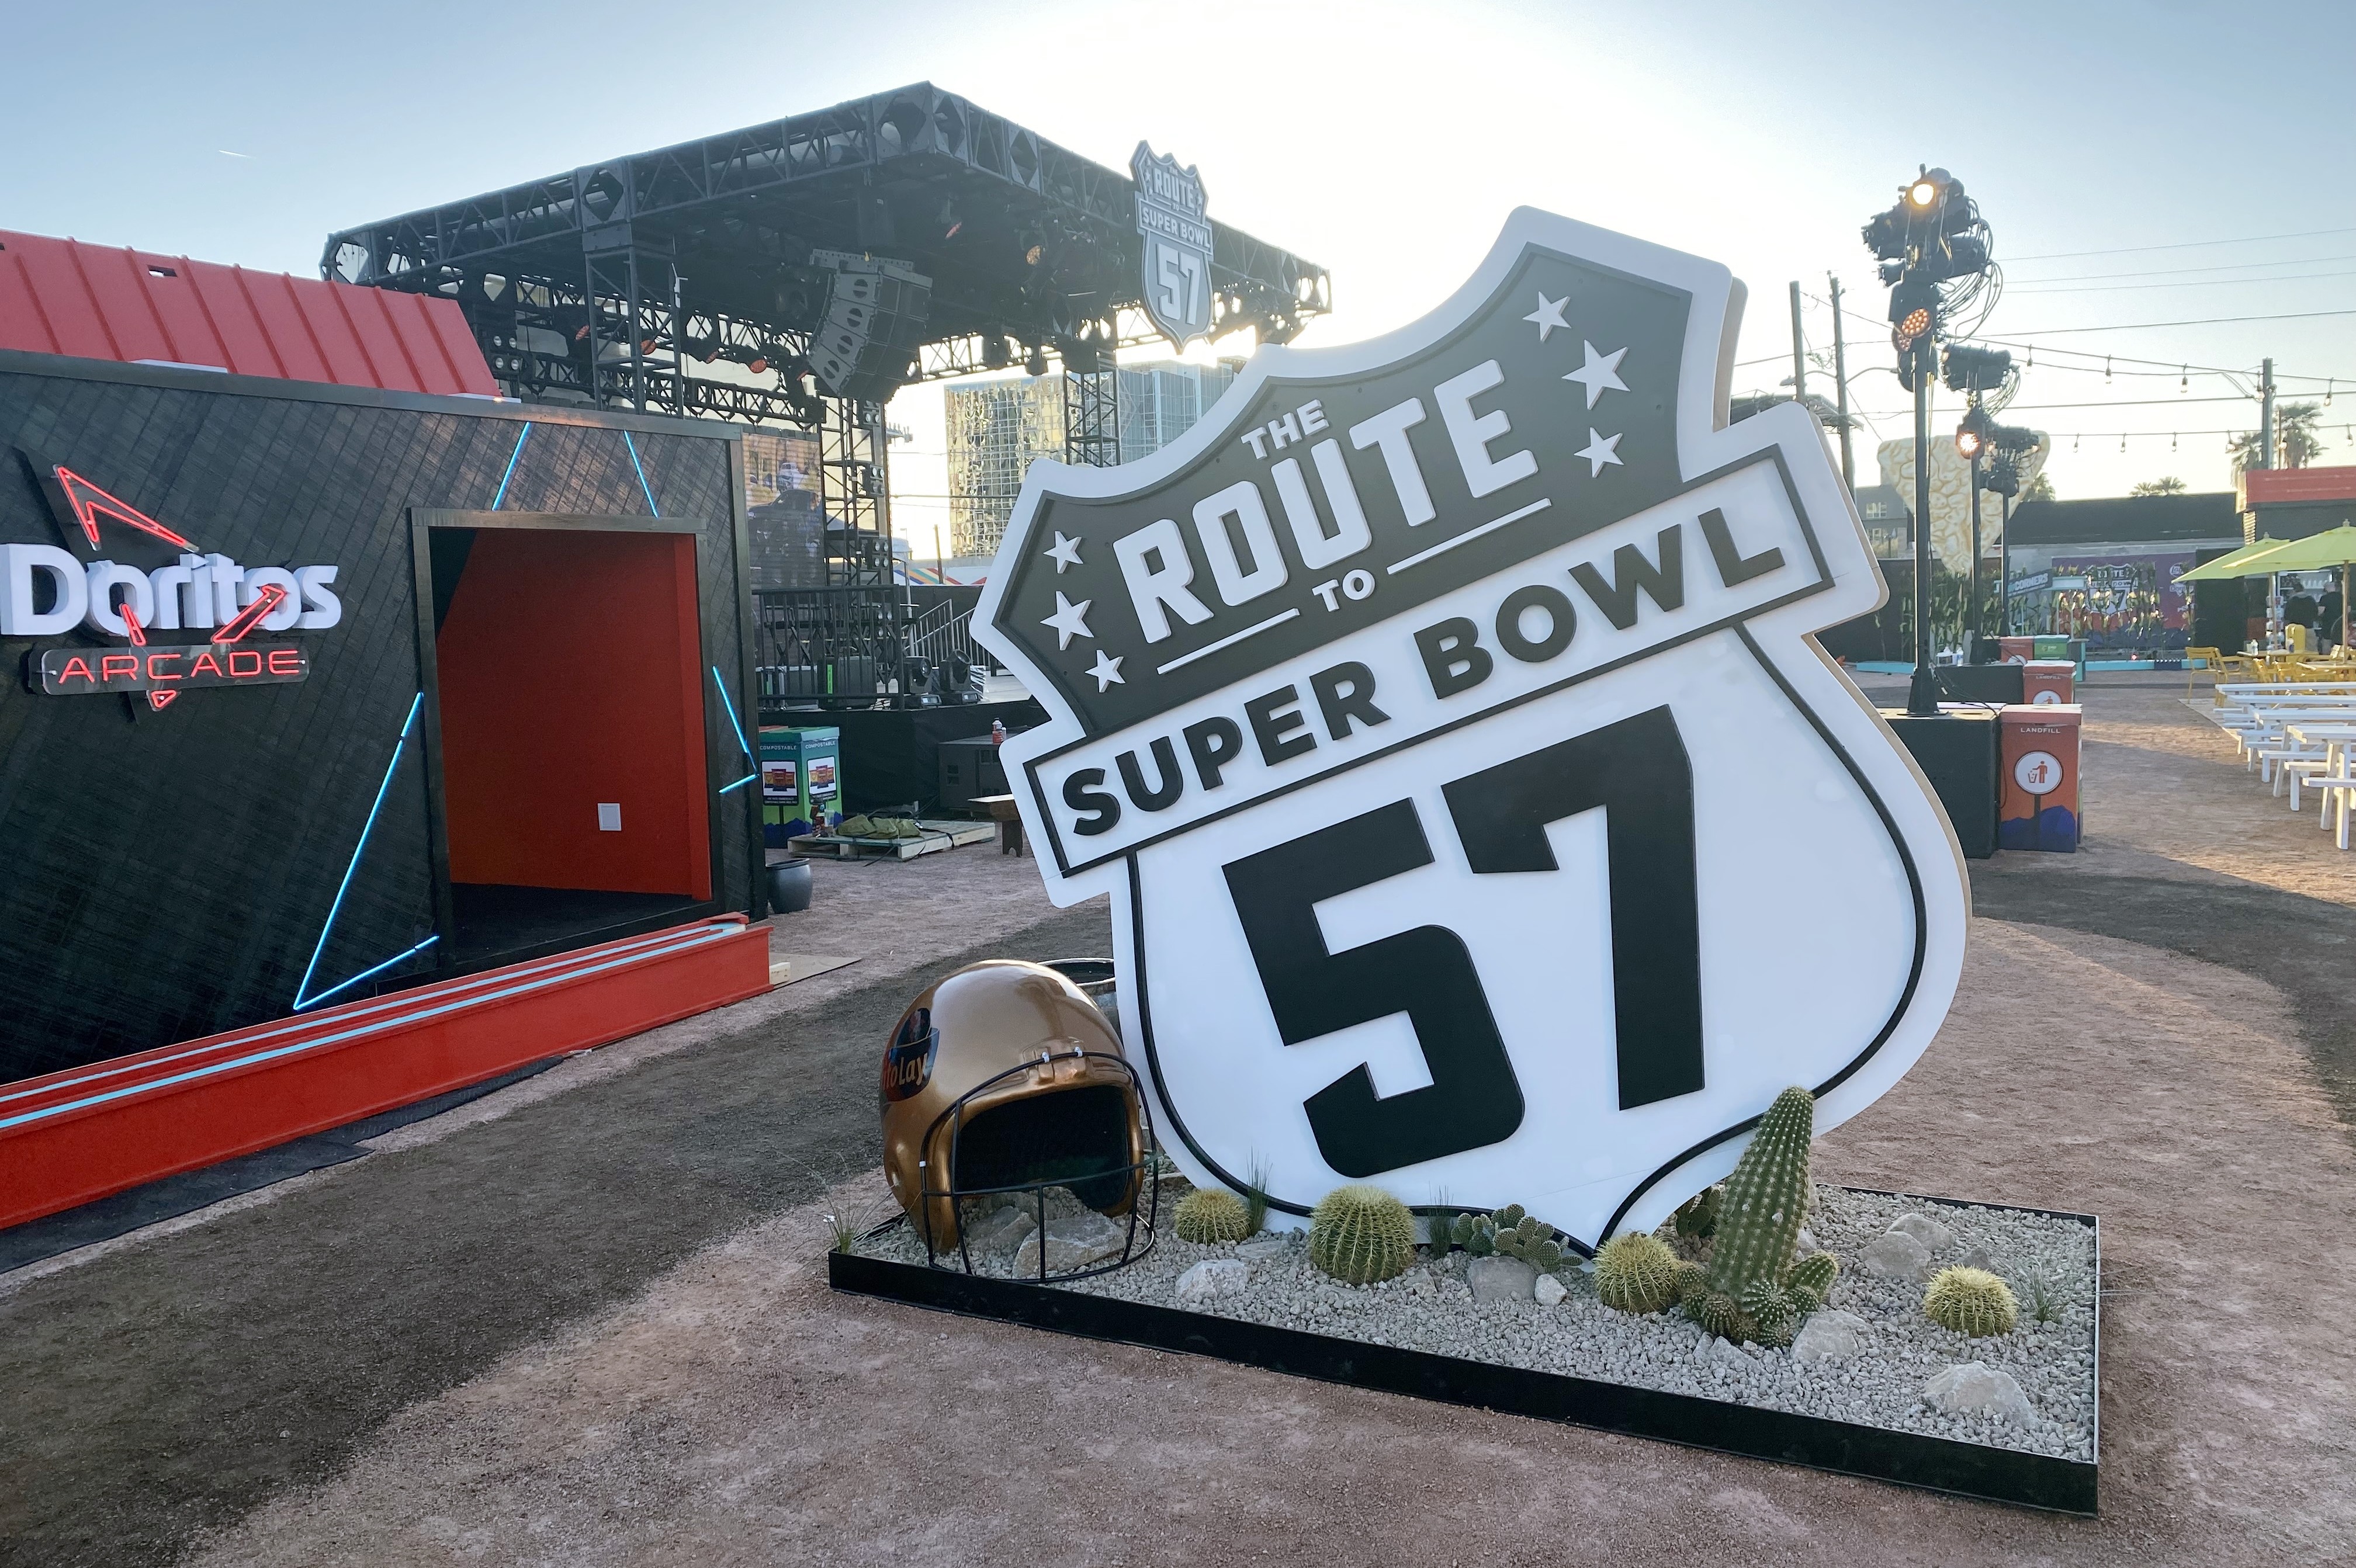 Super Bowl Experience opens Saturday